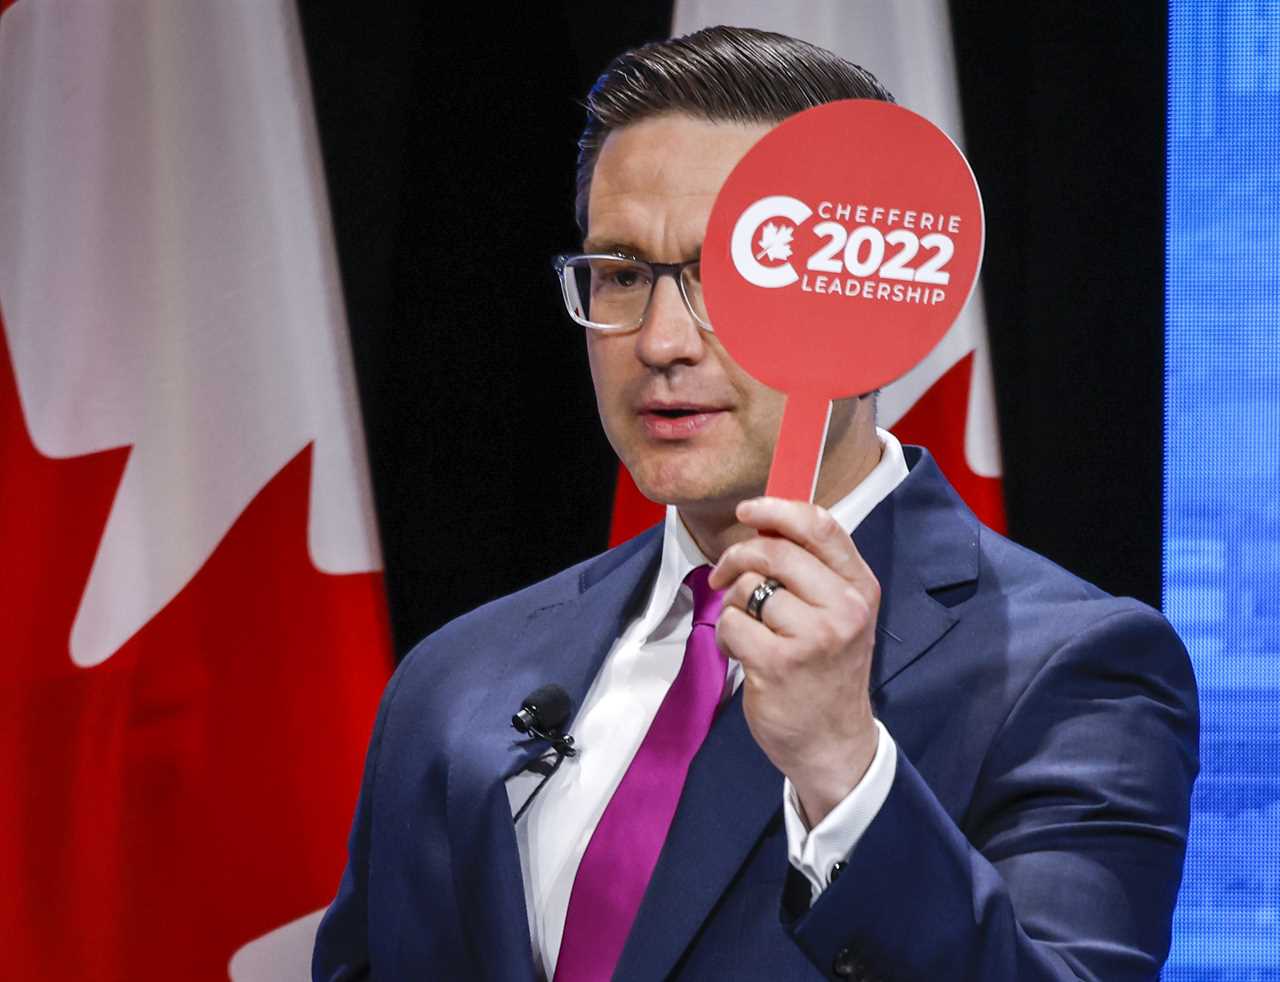 Pierre Poilievre holds his "intervention paddle" at the Conservative Party of Canada English leadership debate in Edmonton, Alta., May 11, 2022. (Jeff McIntosh/The Canadian Press)